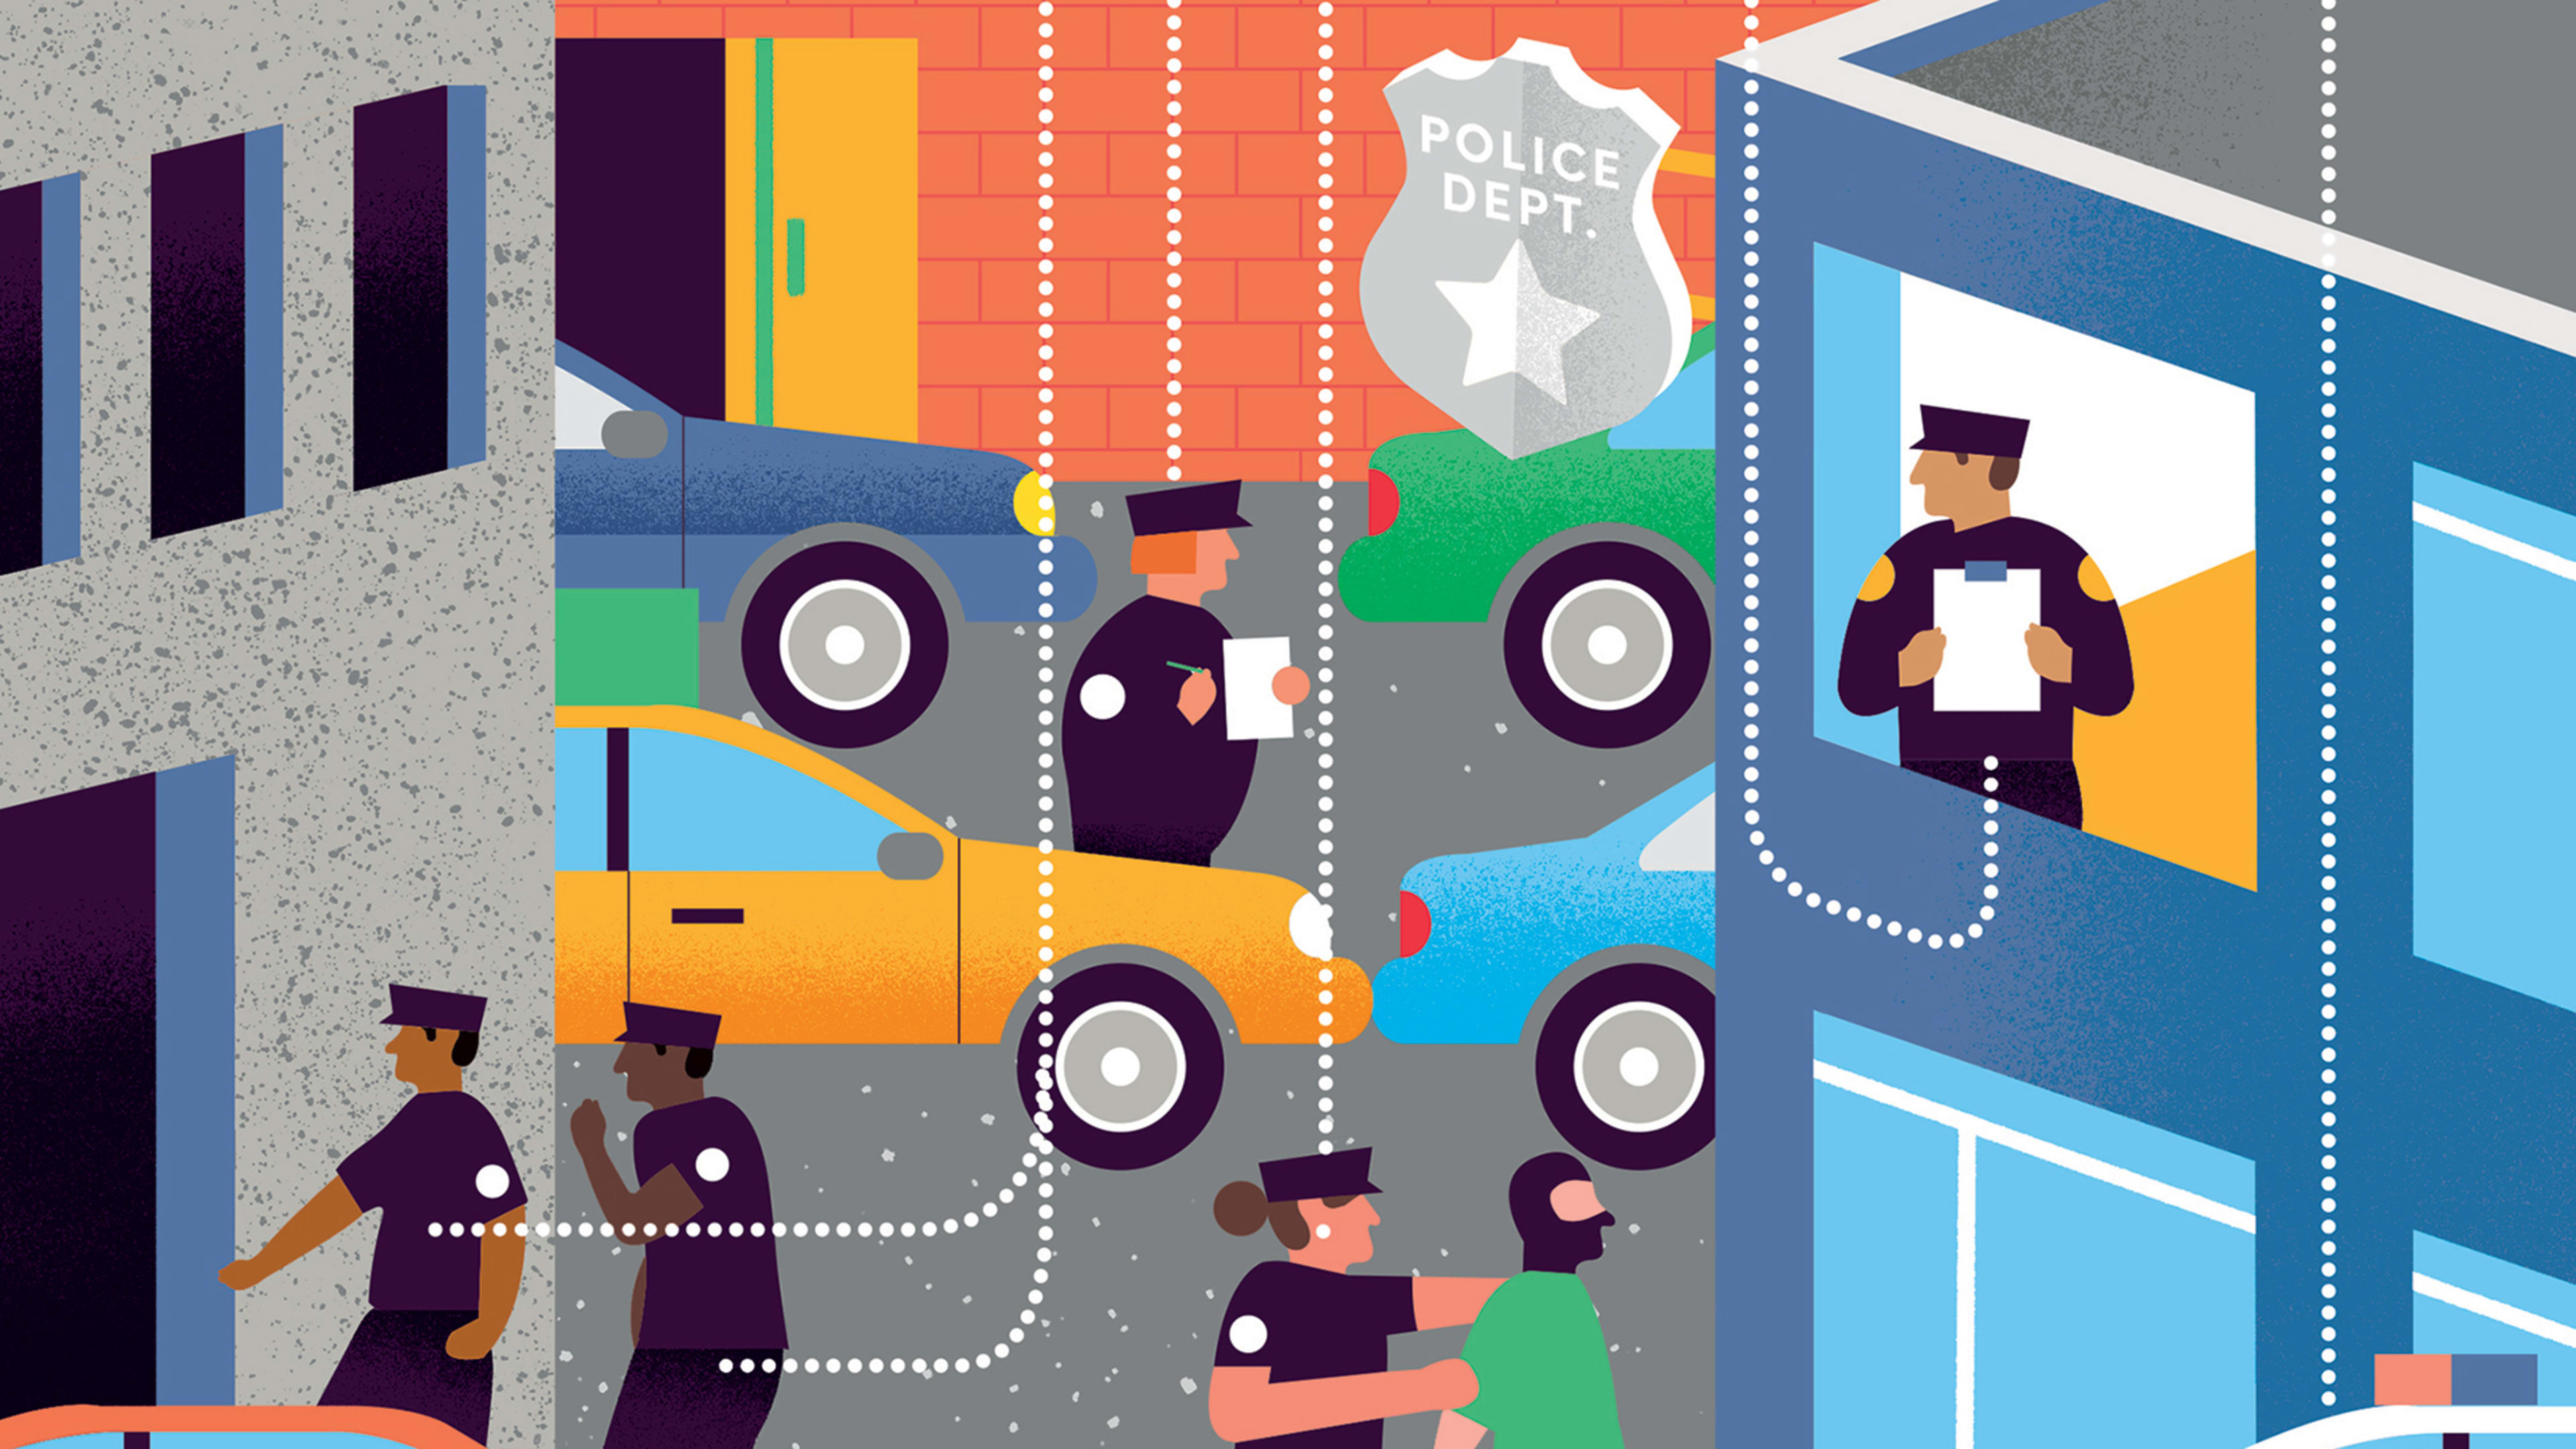 The Big Business Of Police Tech